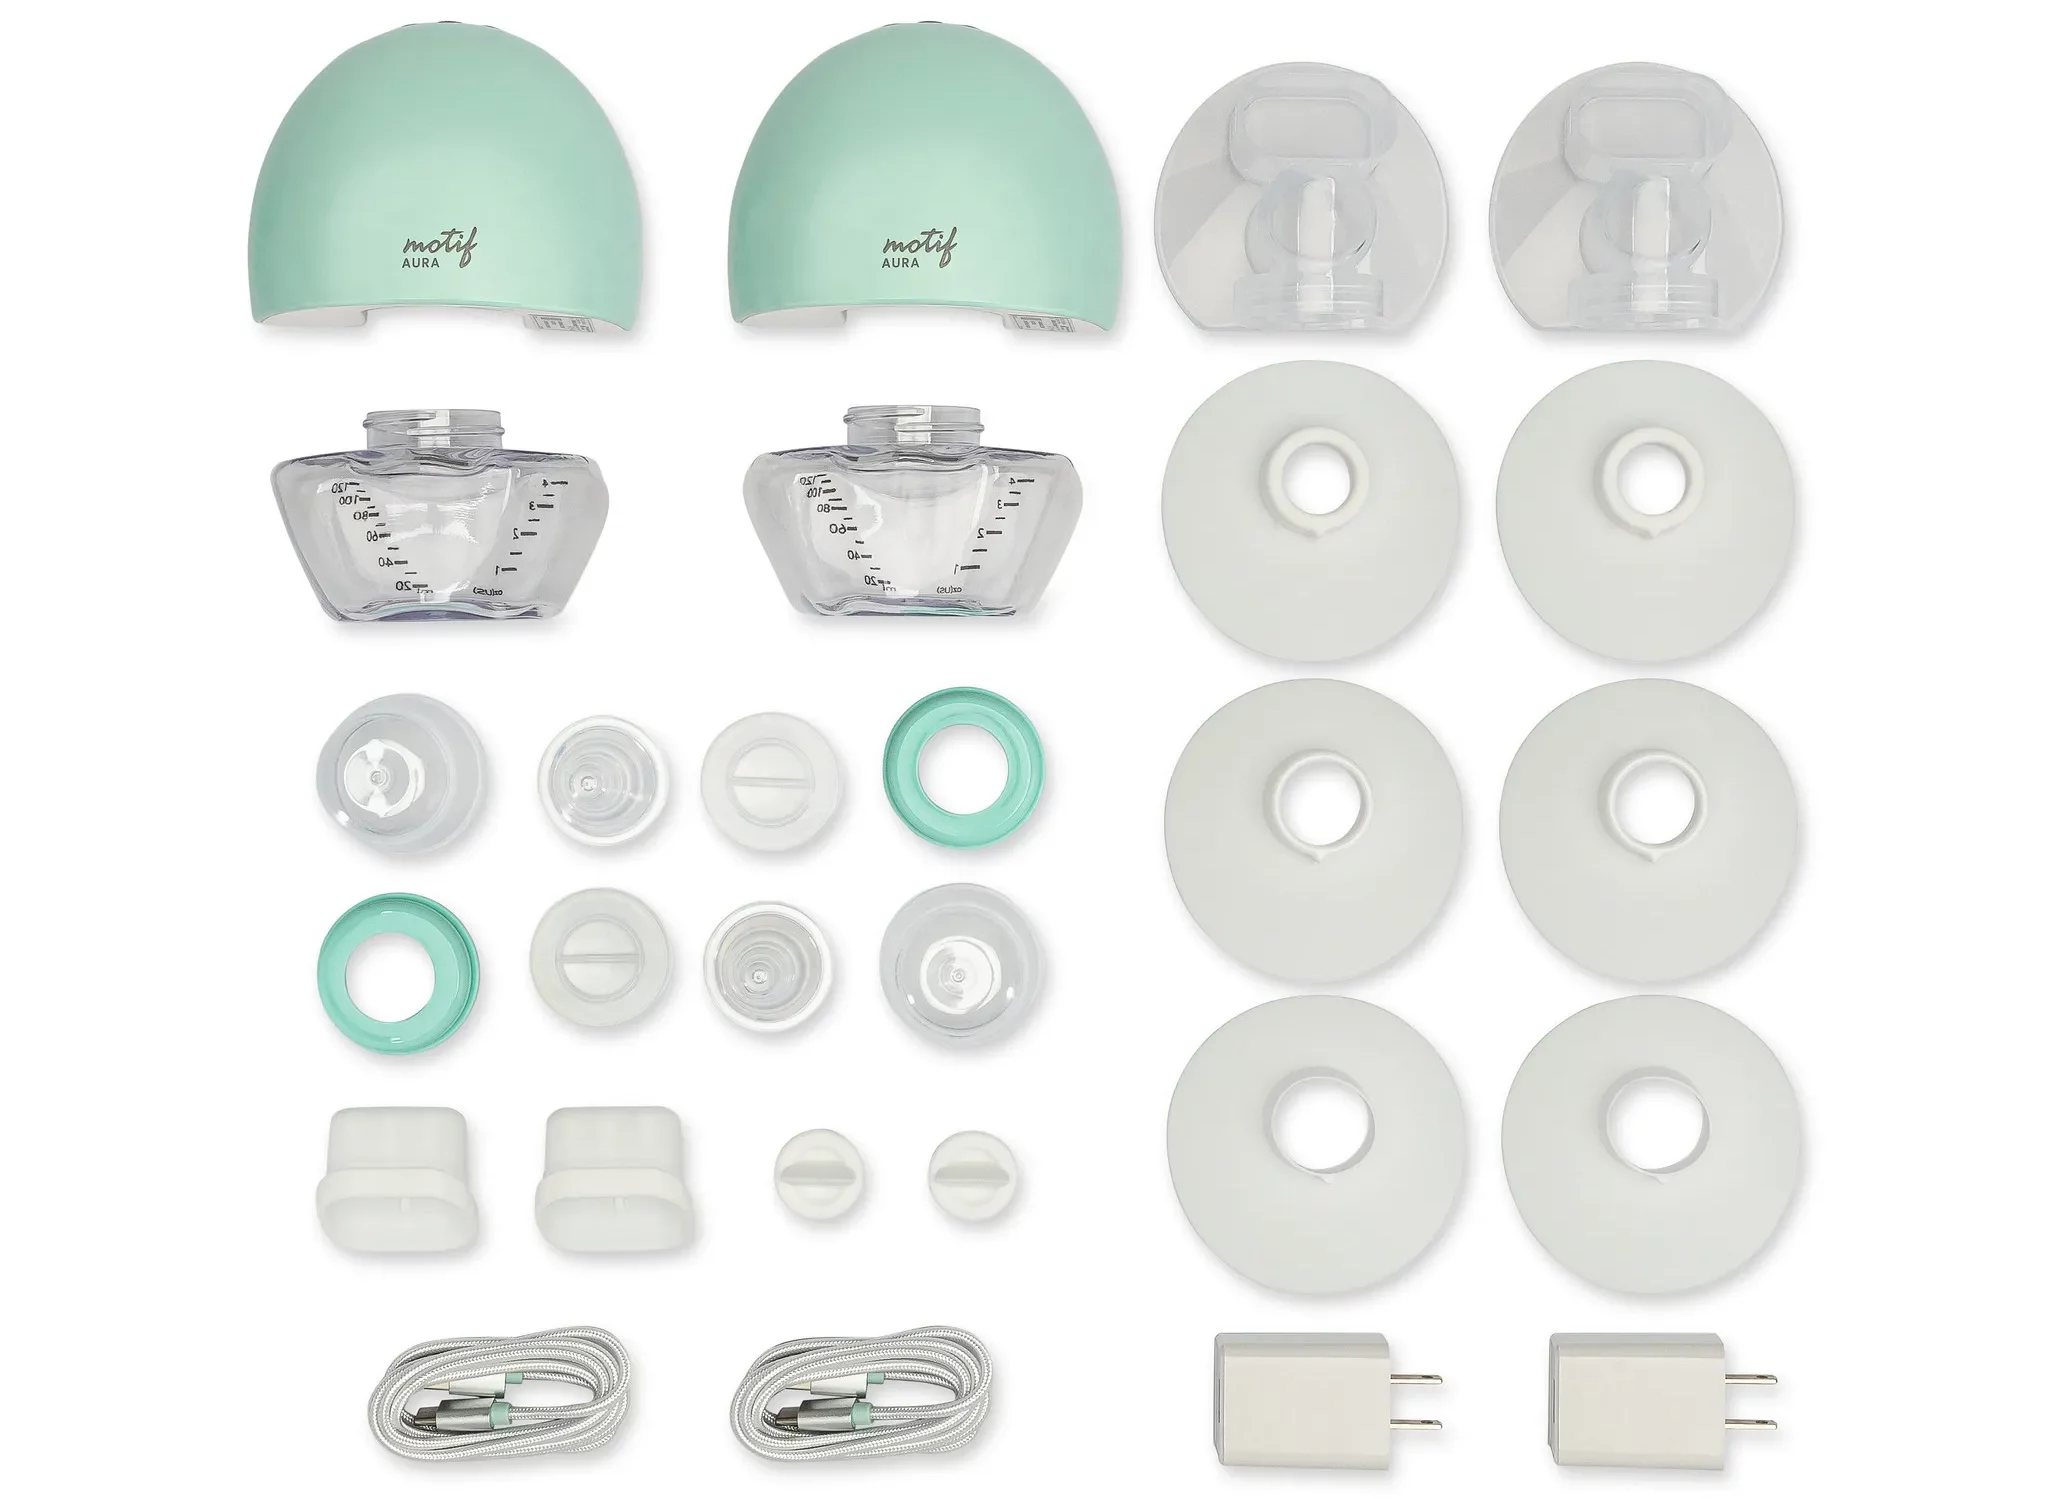 All the items that are included with the Motif Aura wearable breast pump